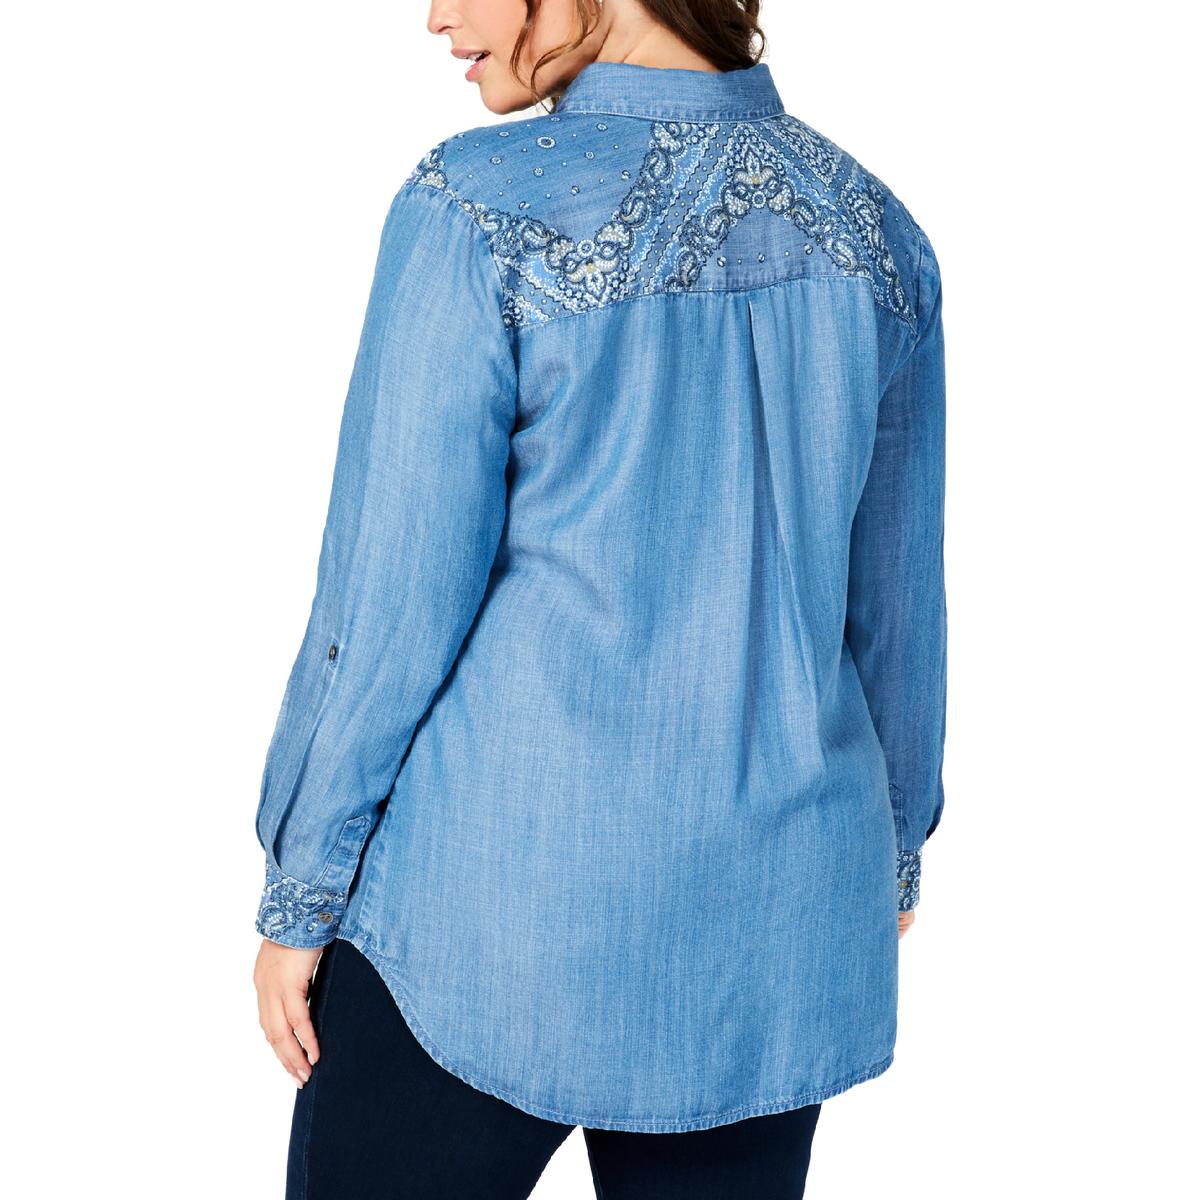 Style & Co. Womens Blue Chambray Printed Button-Down Top Shirt Plus 3X ...